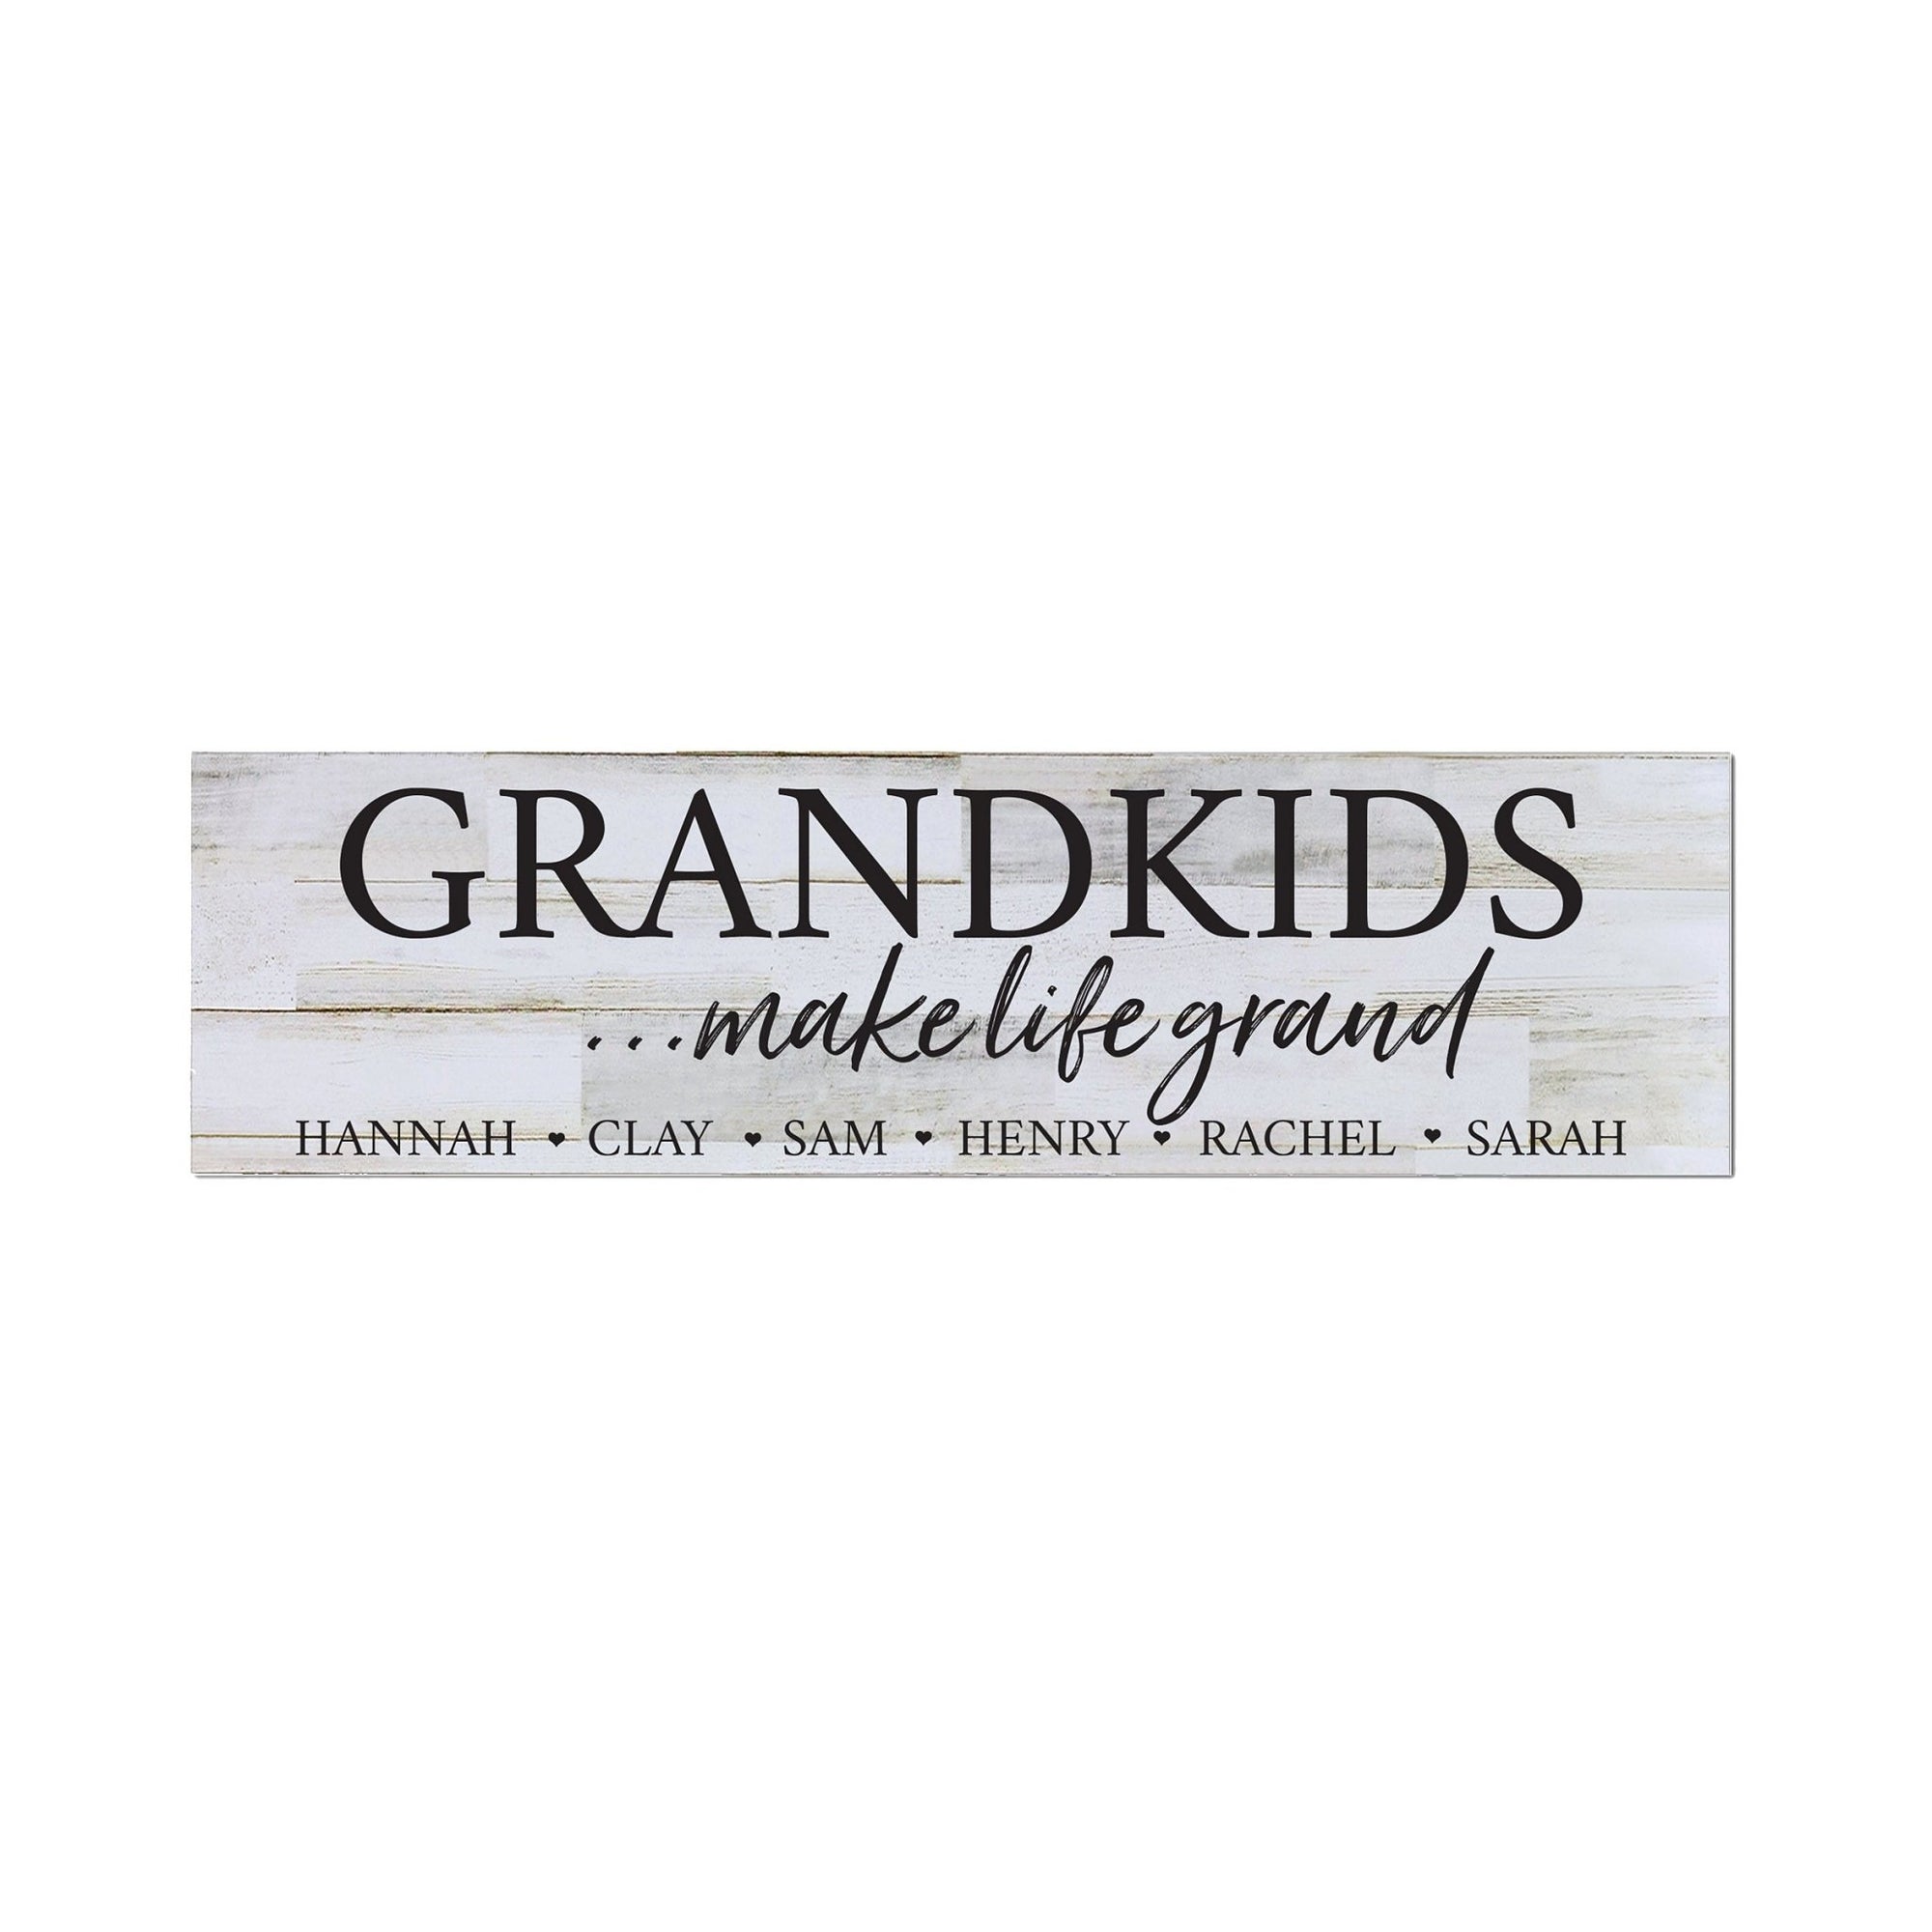 Custom Inspirational Wooden Wall Plaque For Grandparents 22.5” x 6” - Grandkids Makes Life Grand - LifeSong Milestones